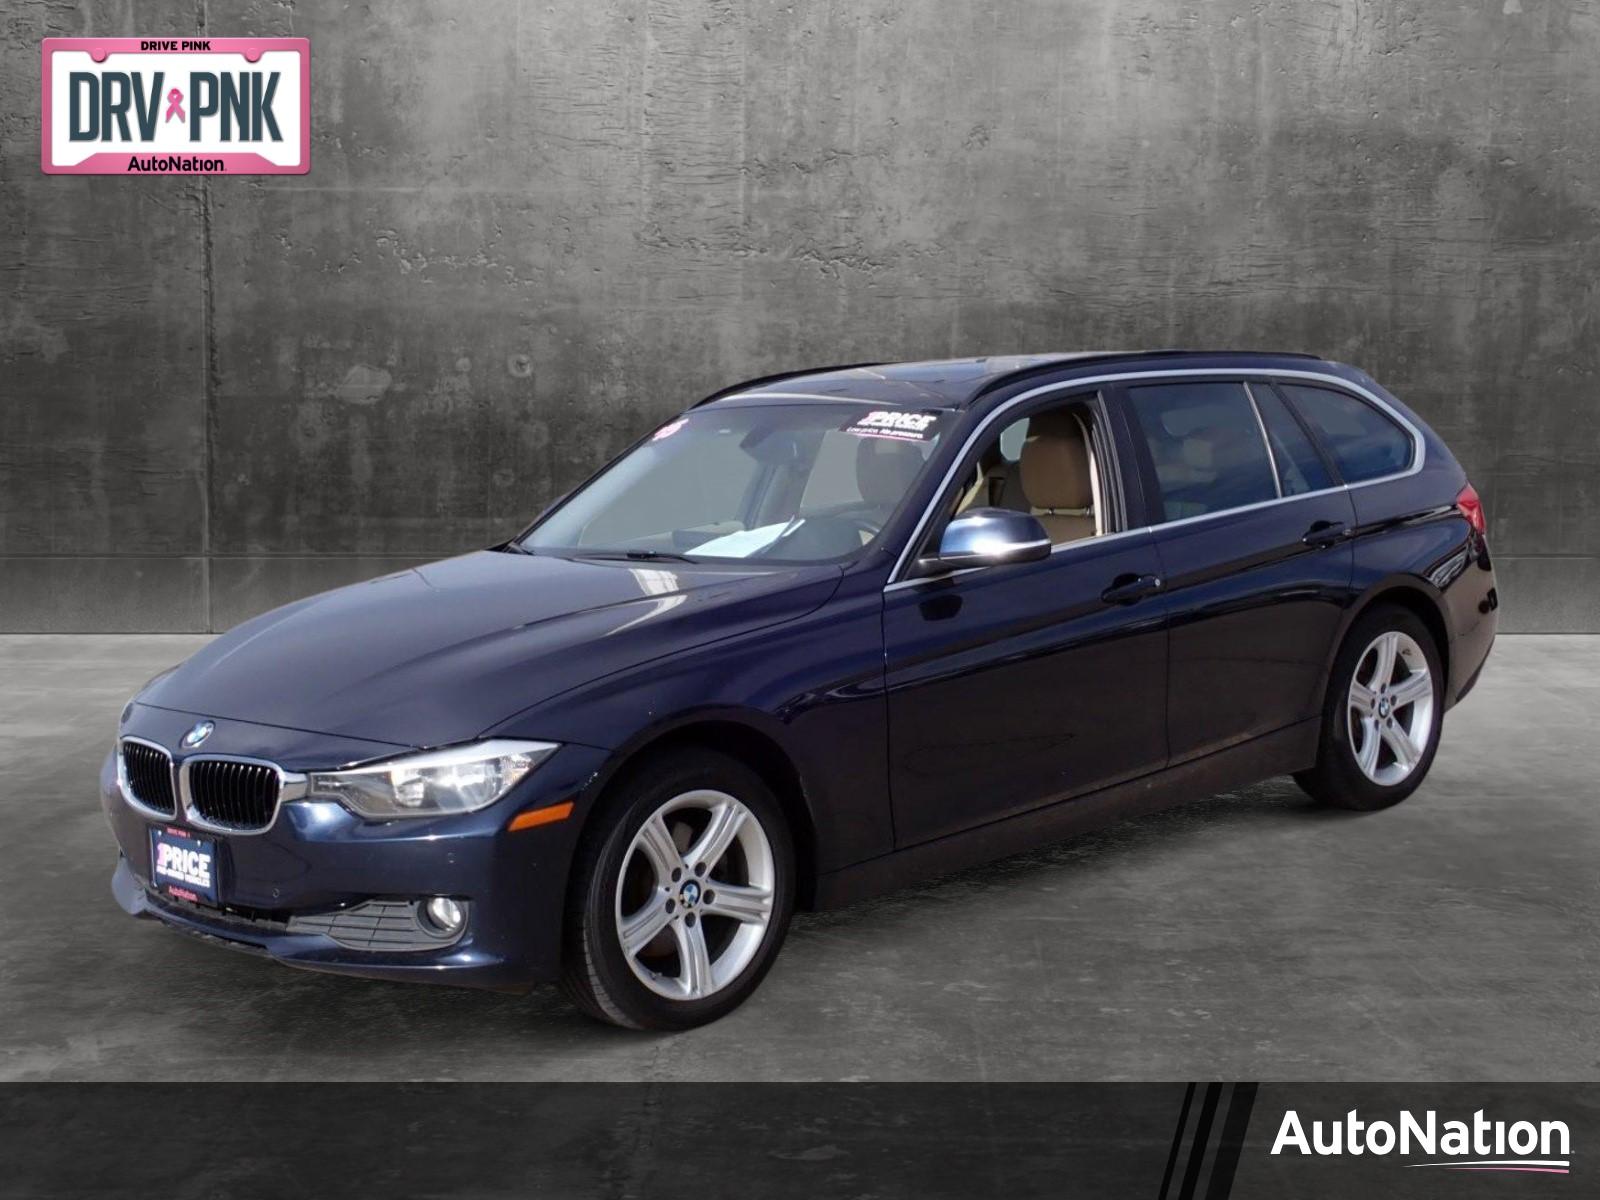 2015 BMW 328d xDrive Vehicle Photo in DENVER, CO 80221-3610